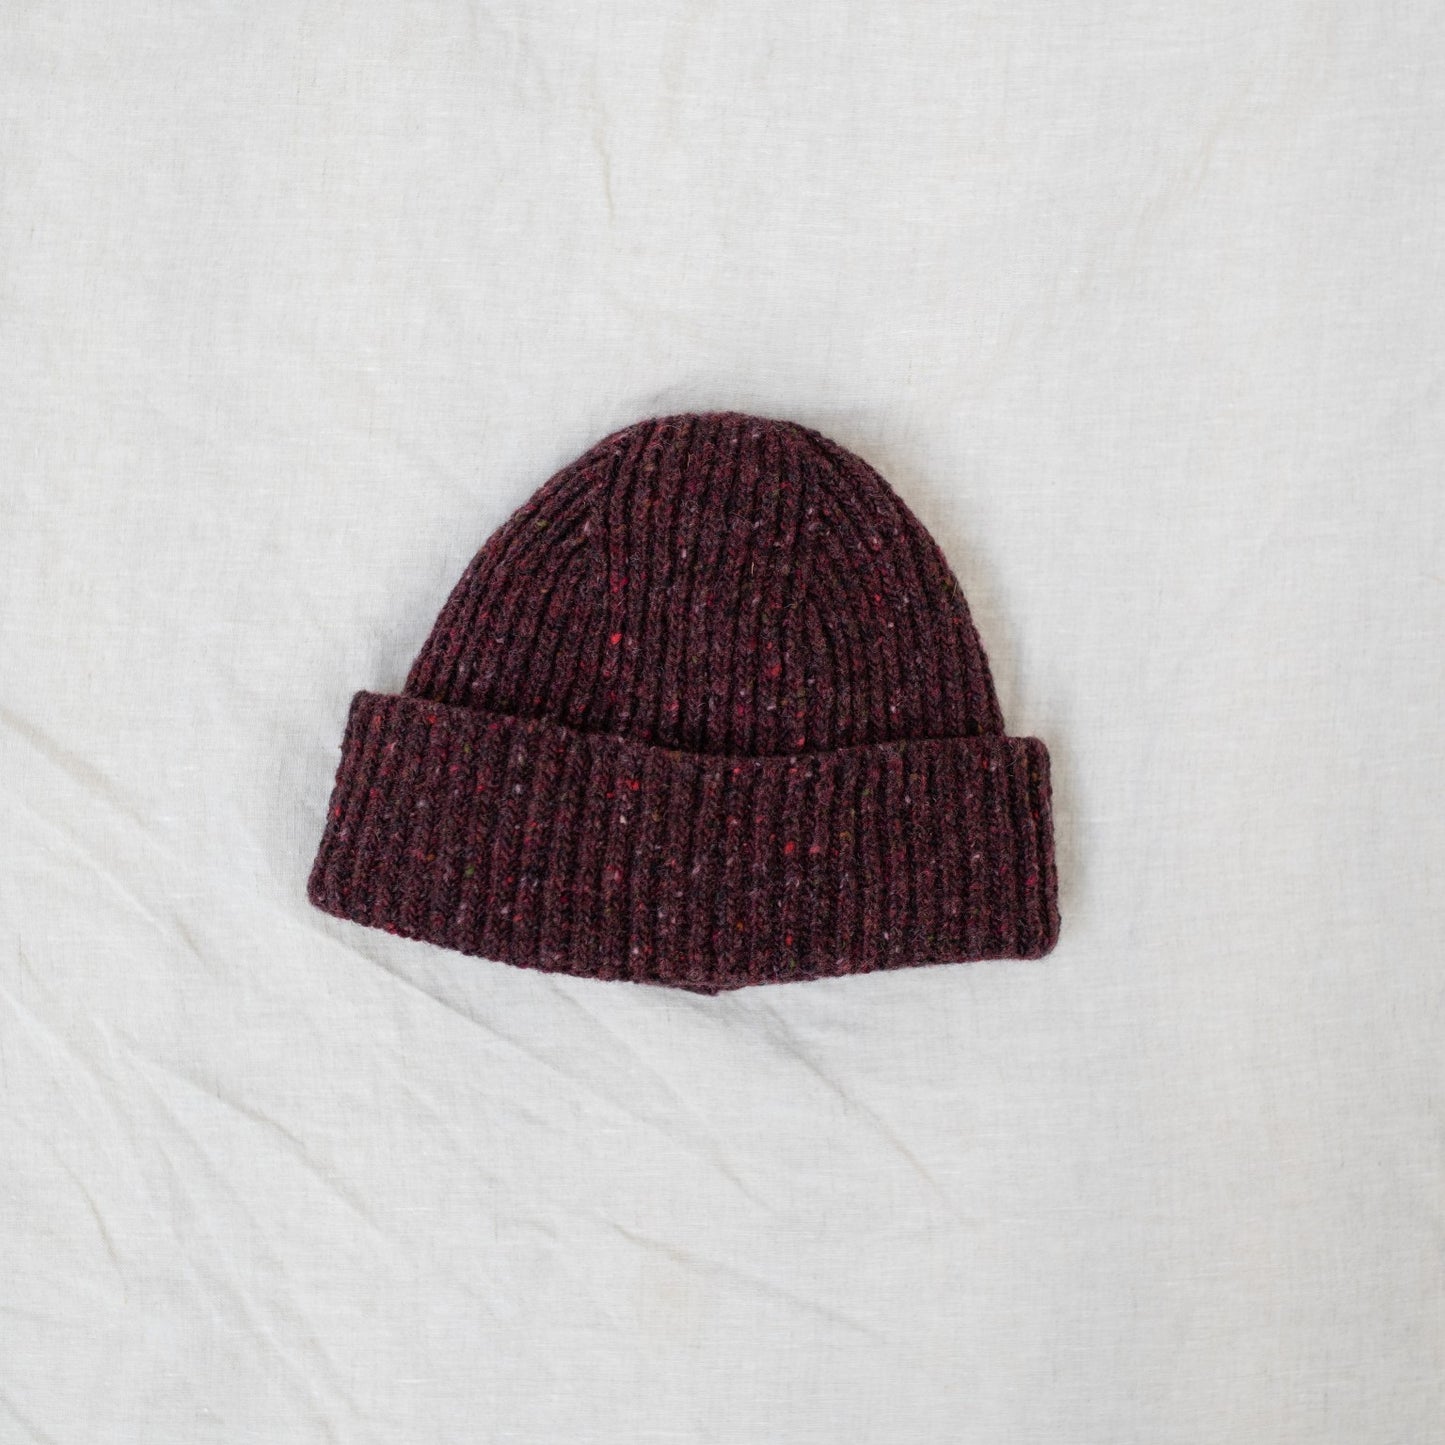 Donegal Merino Wool Beanie Hat in Mulberry